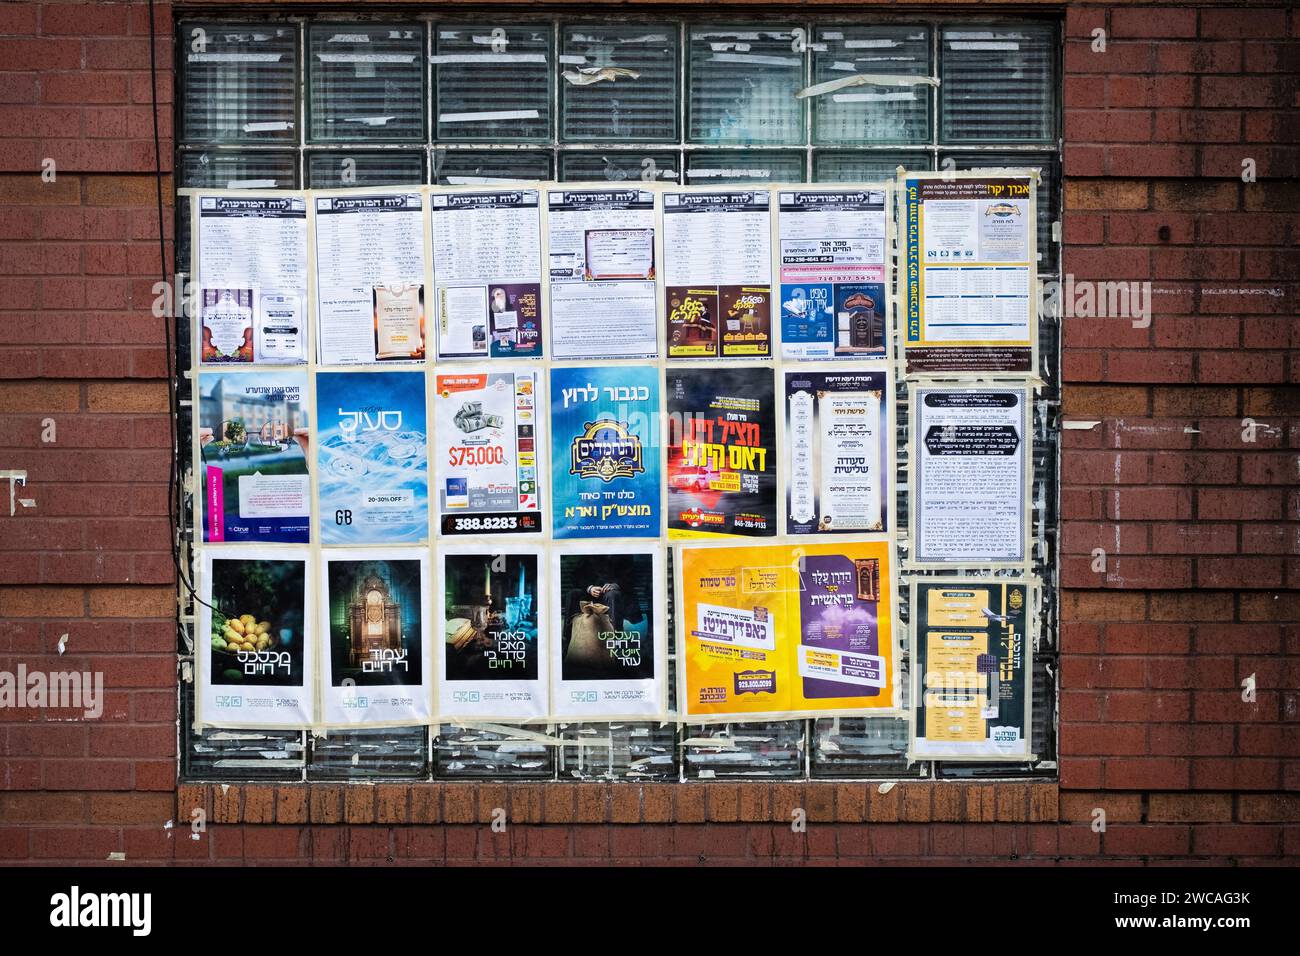 A community bulletin board with announcements, scheduled classes, advertisements & solicitations. In Williamsburg, Brooklyn, New York. Stock Photo